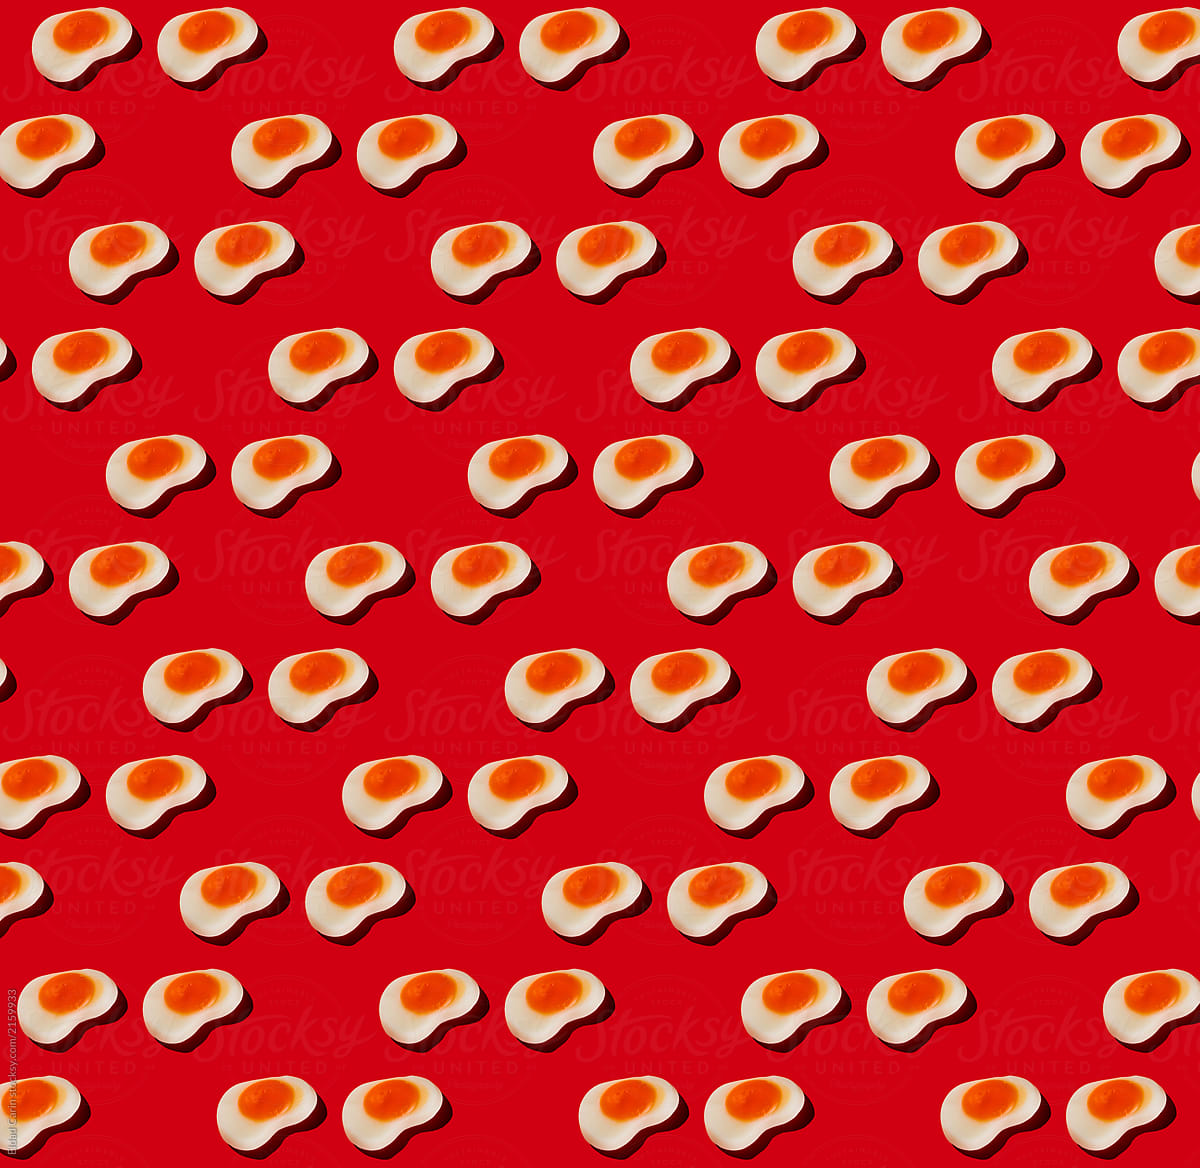 Fried Egg Gummy Candy Pattern on Red